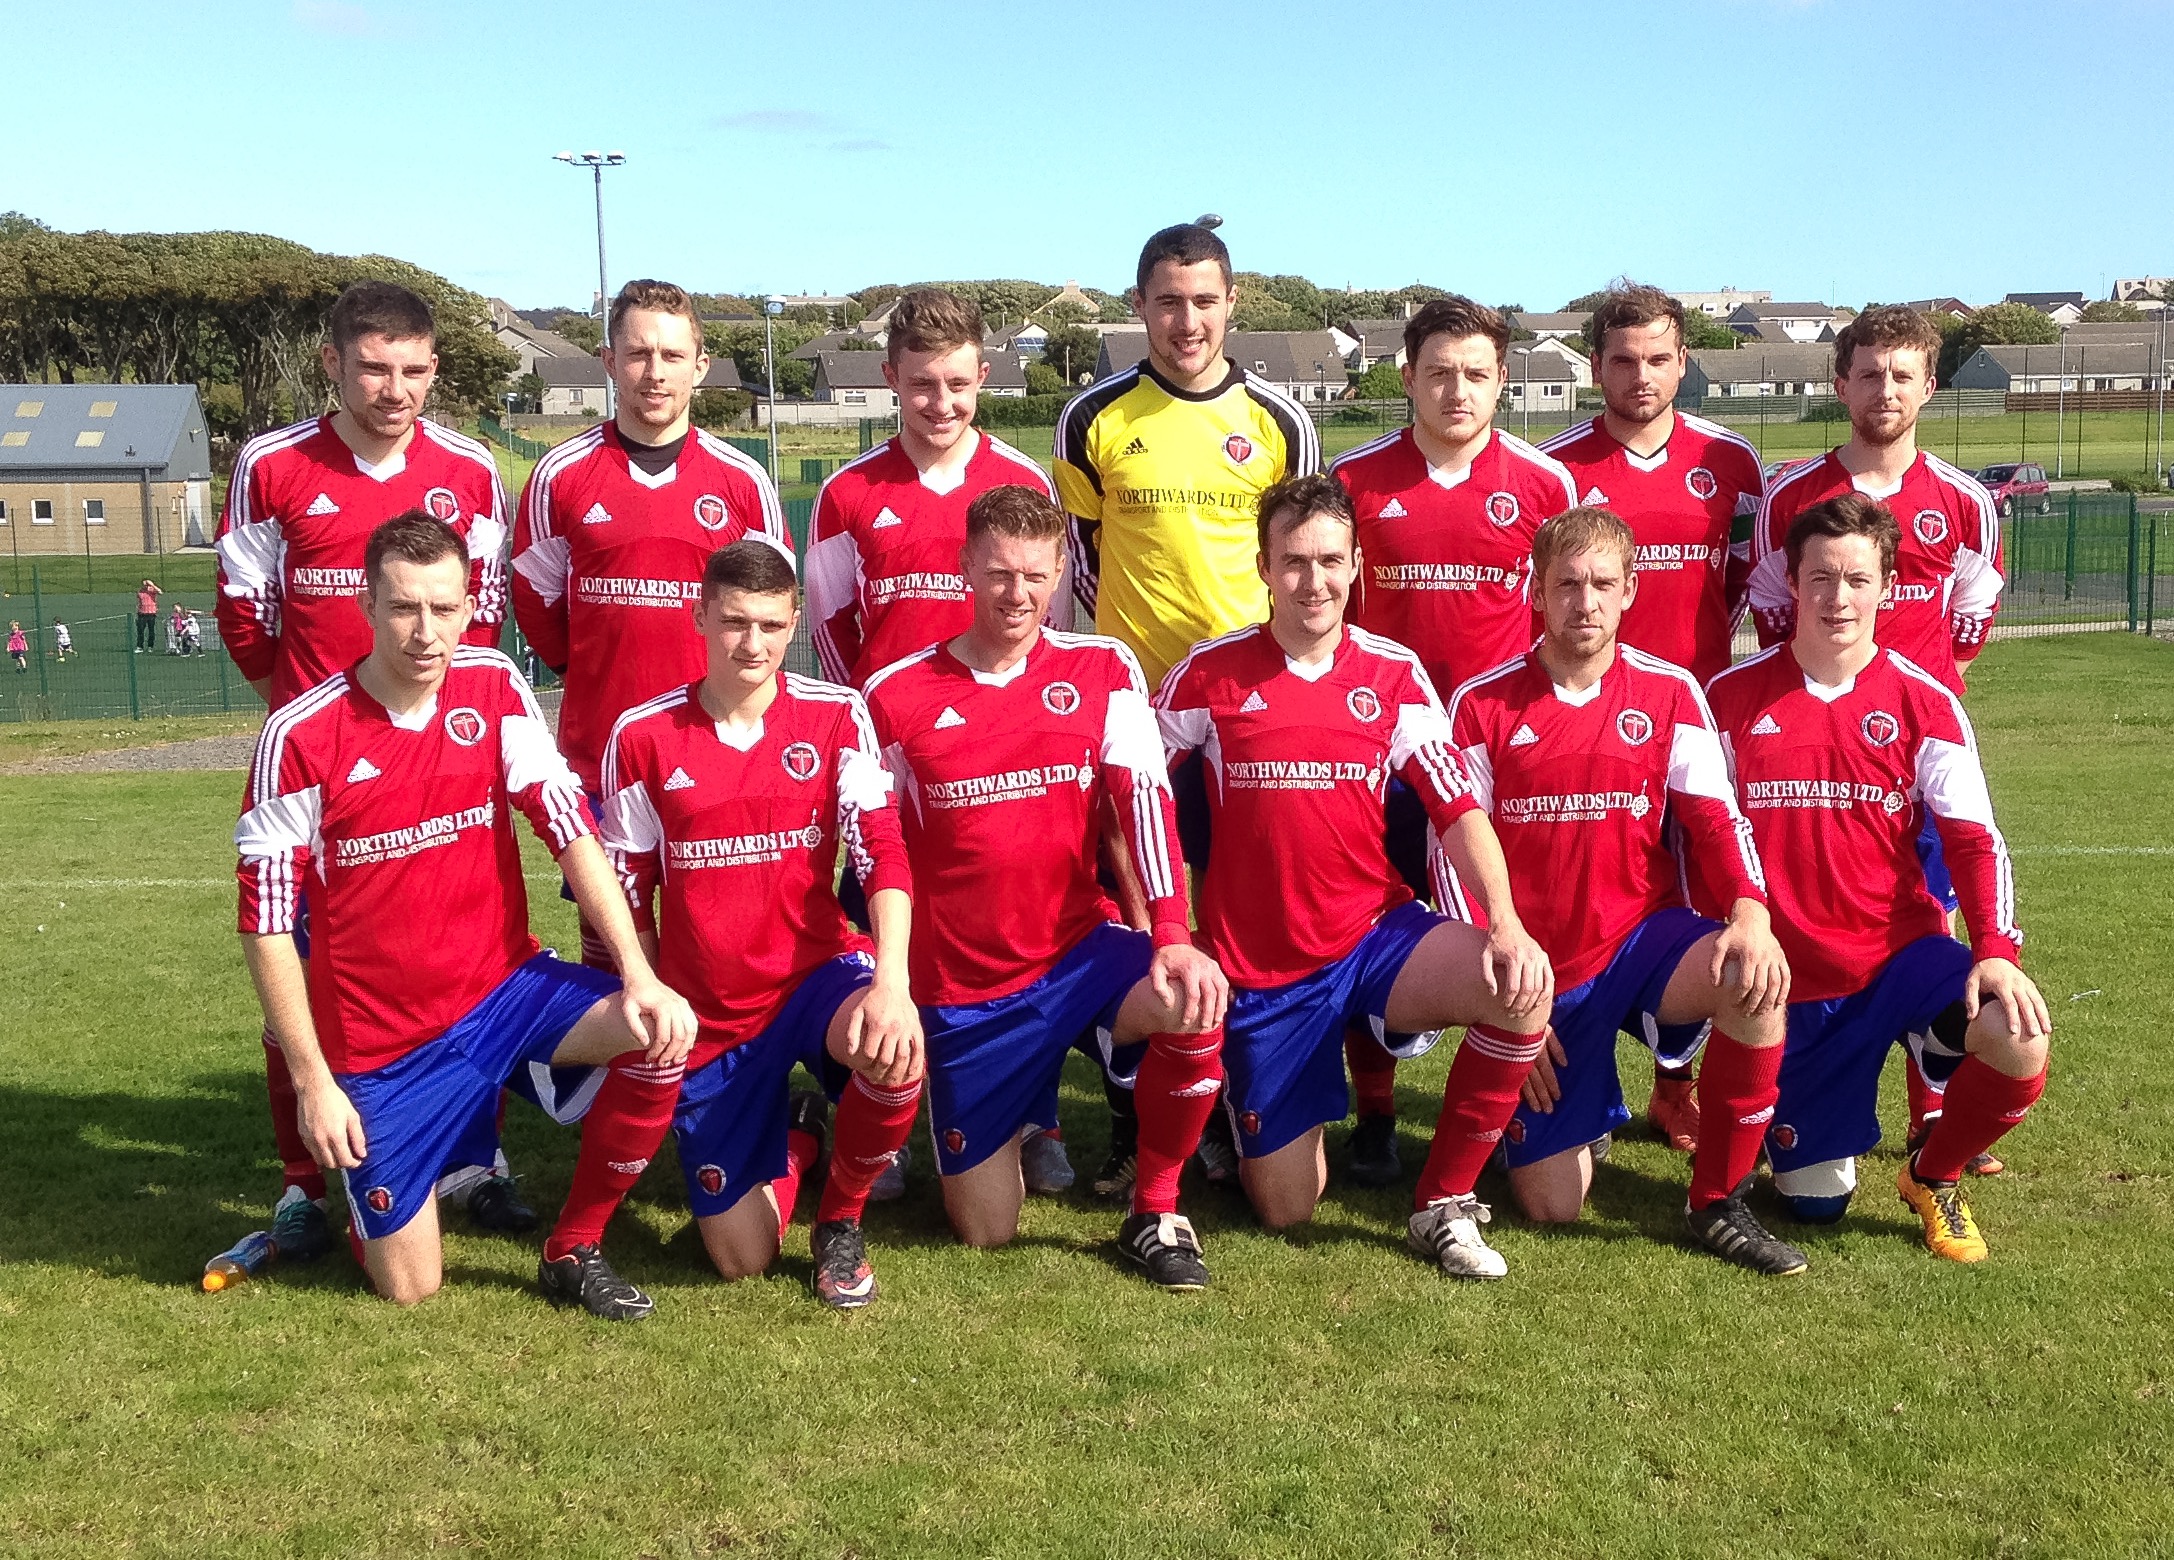 Orkney FC got their 2016/17 campaign off to a winning start, beating Inverness Athletic 2-0 in Kirkwall.